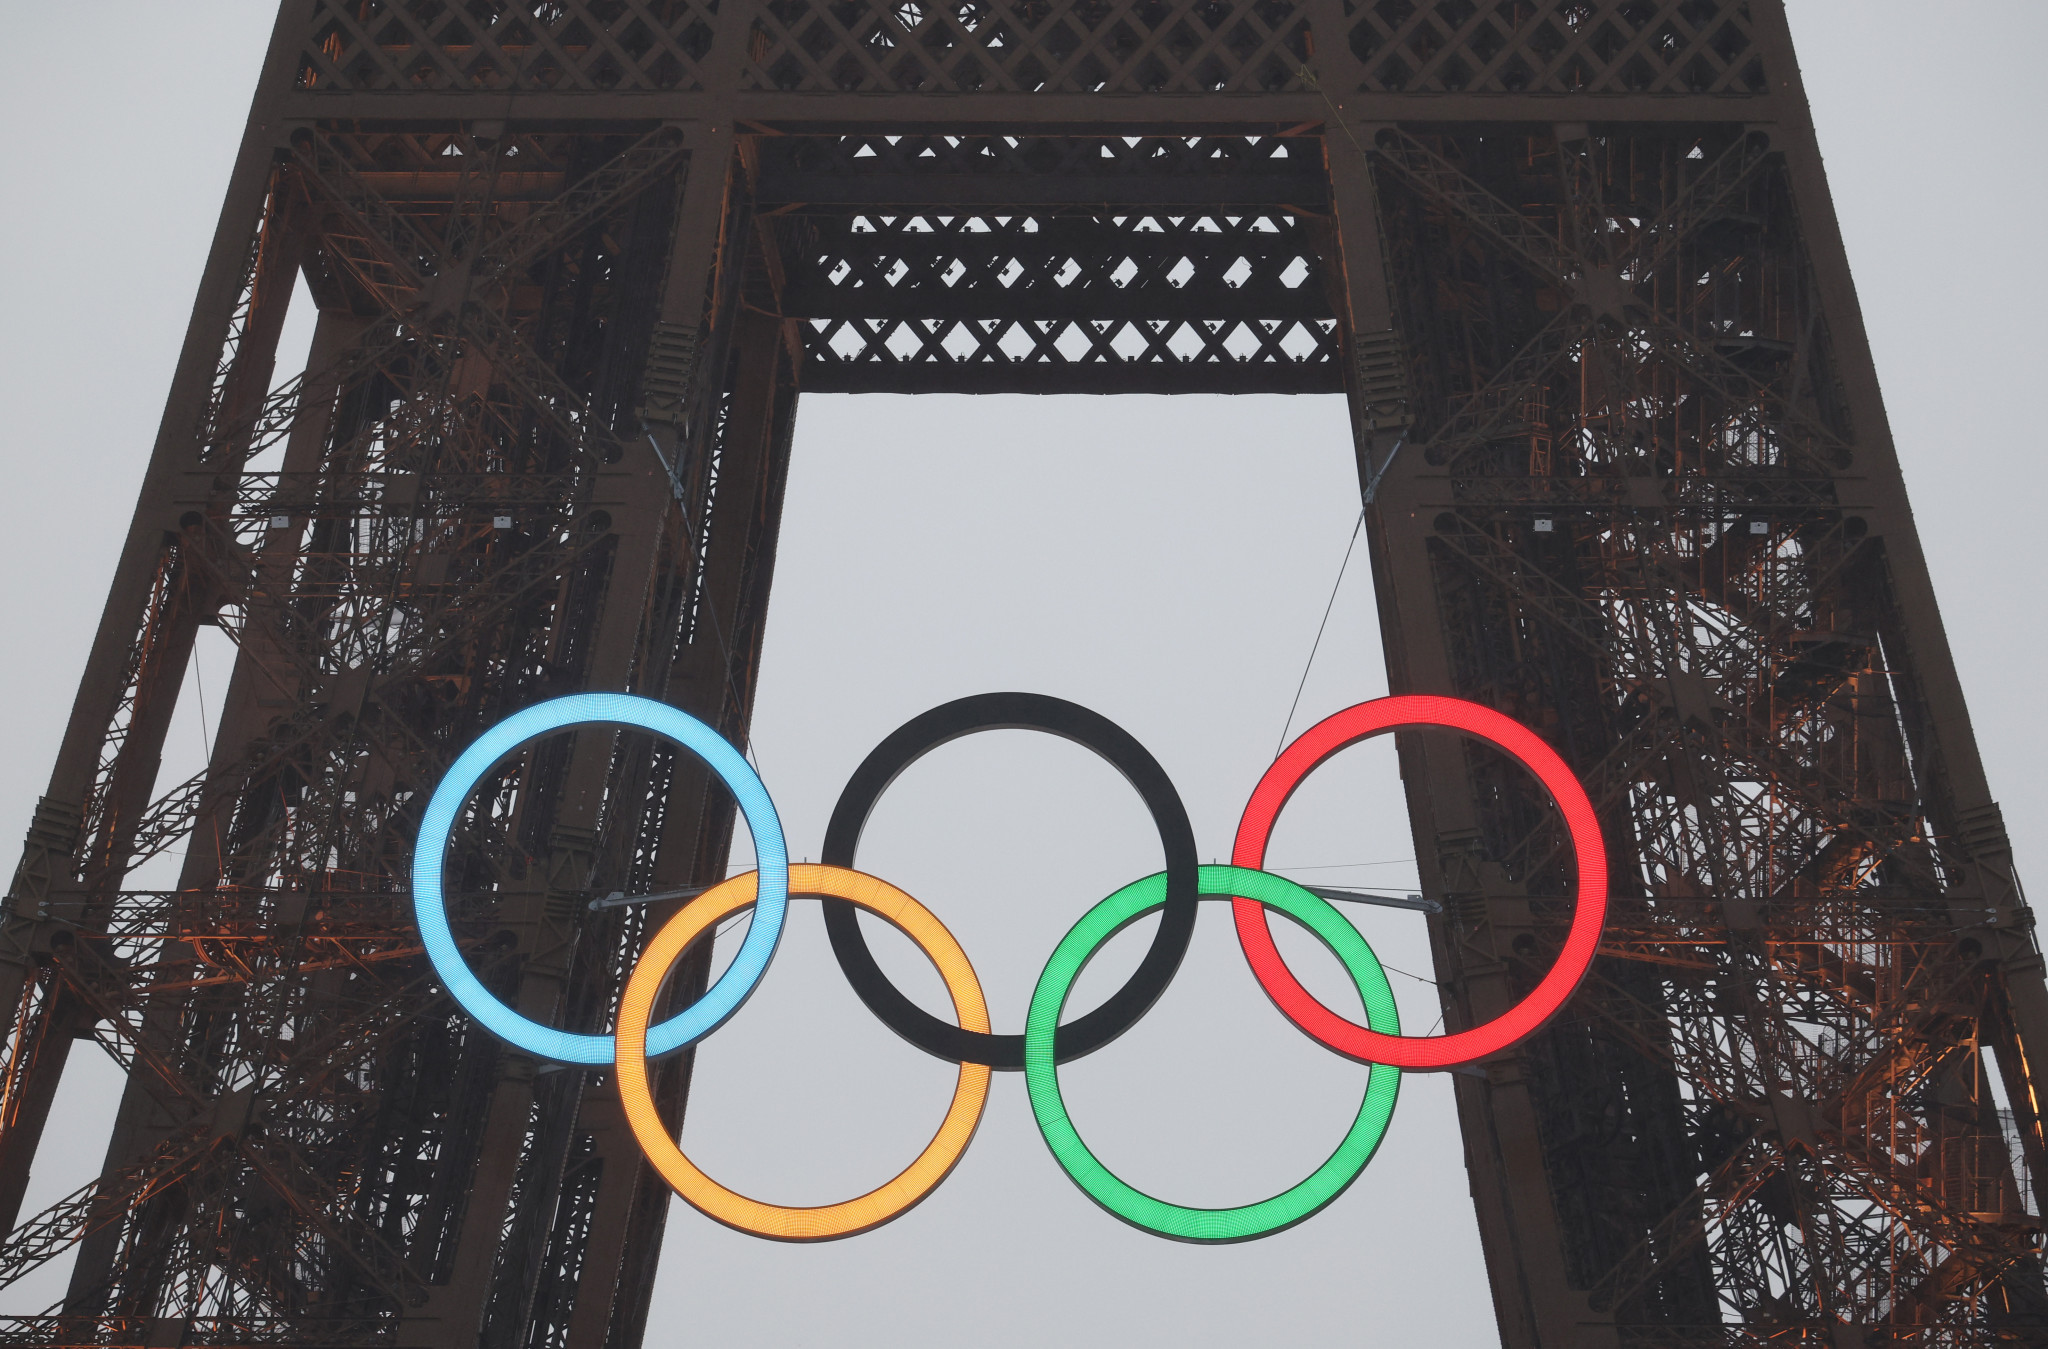 The Eiffel Tower featuring the Olympic Rings during the Paris 2024 Olympic Games. GETTY IMAGES